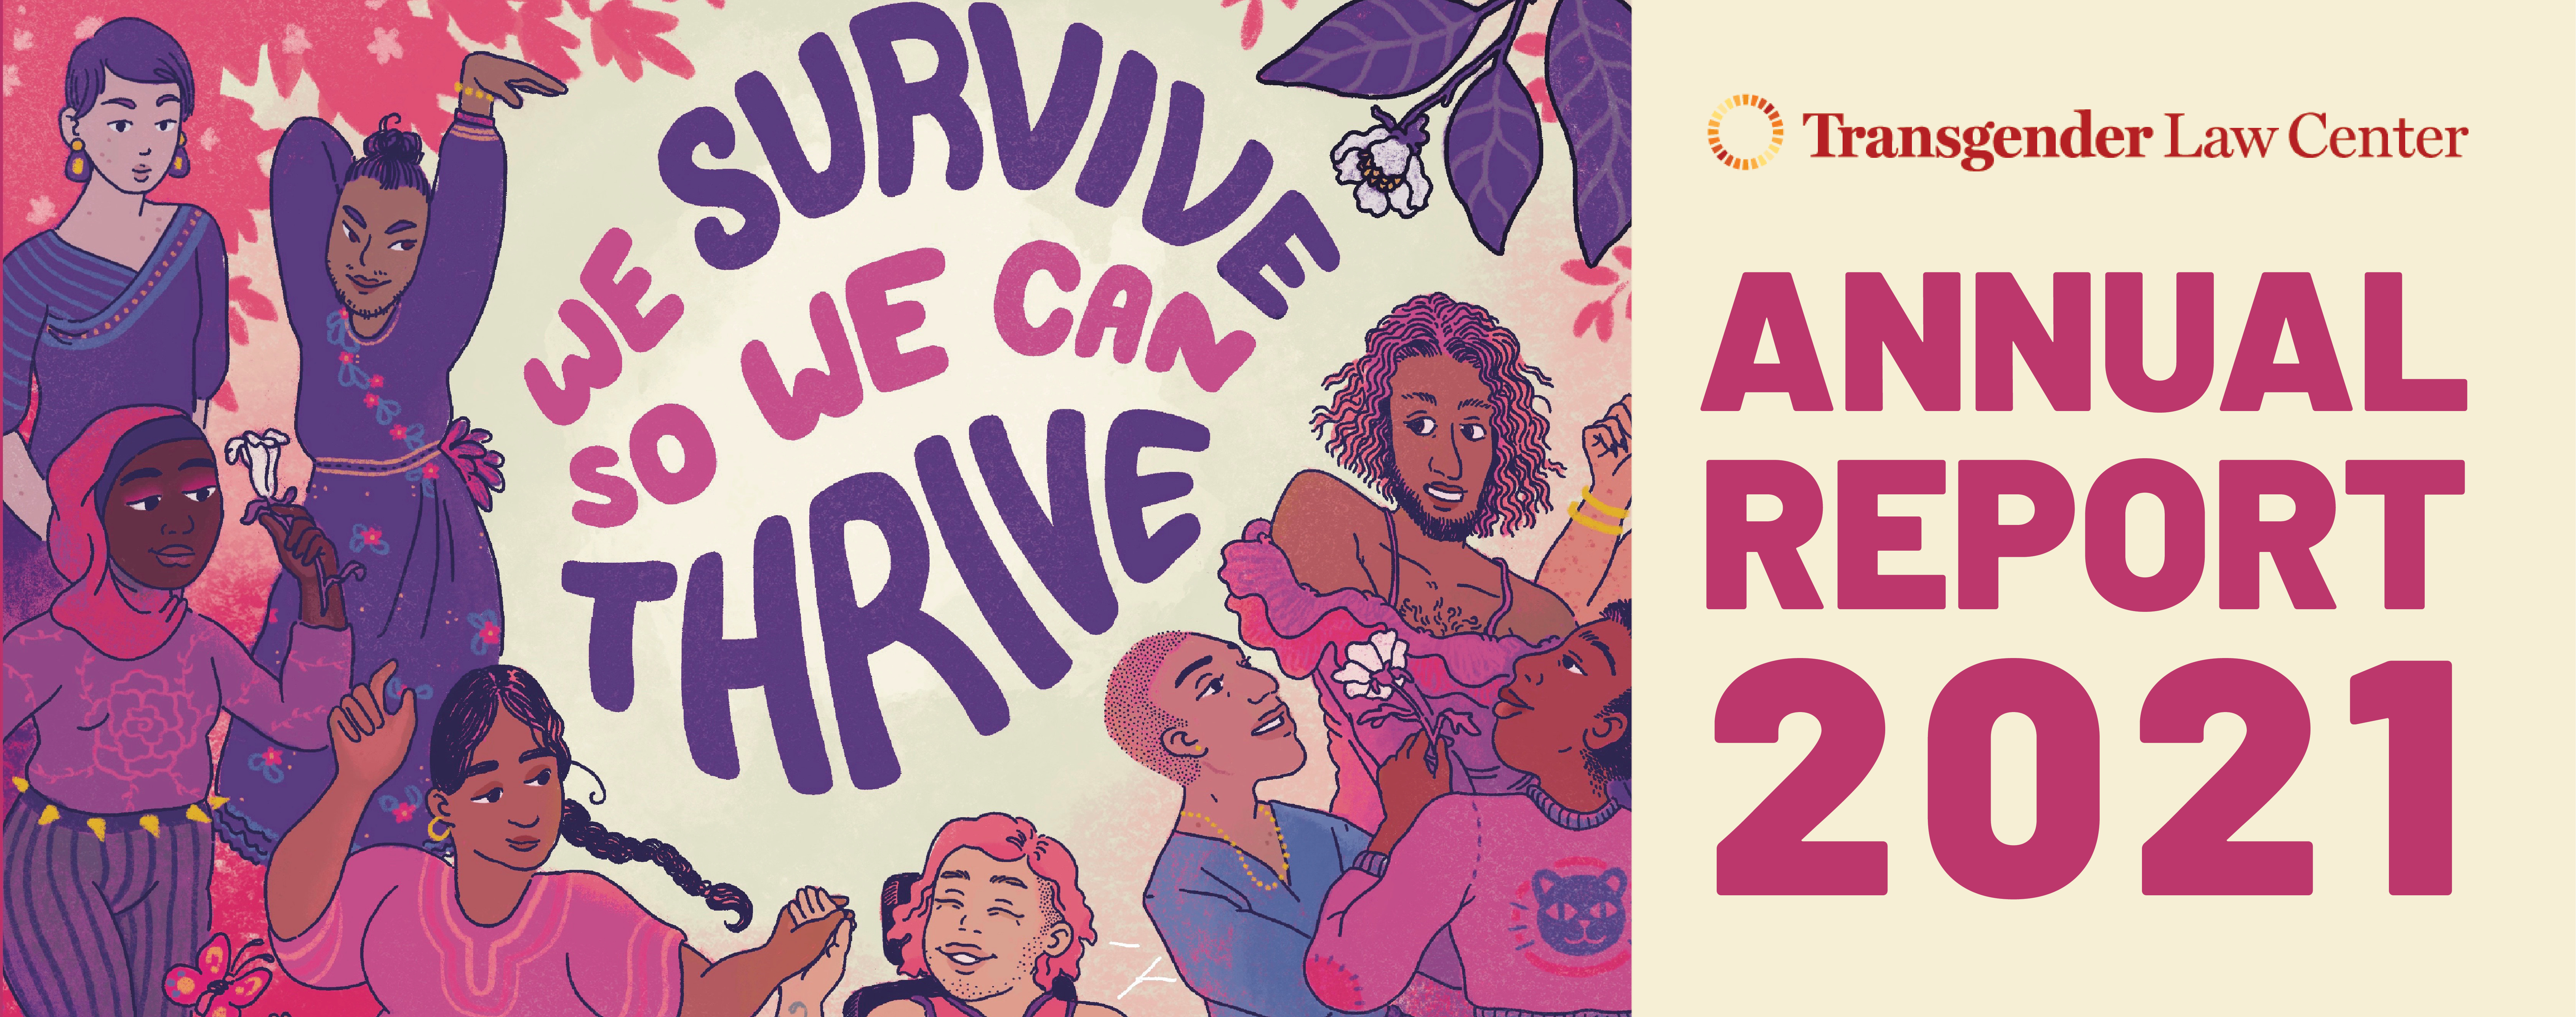 On the left, illustrated people of many genders and races surround text that reads "We survive so we can thrive." On the right, the TLC logo sits above large pink text reading "Annual Report 2021"